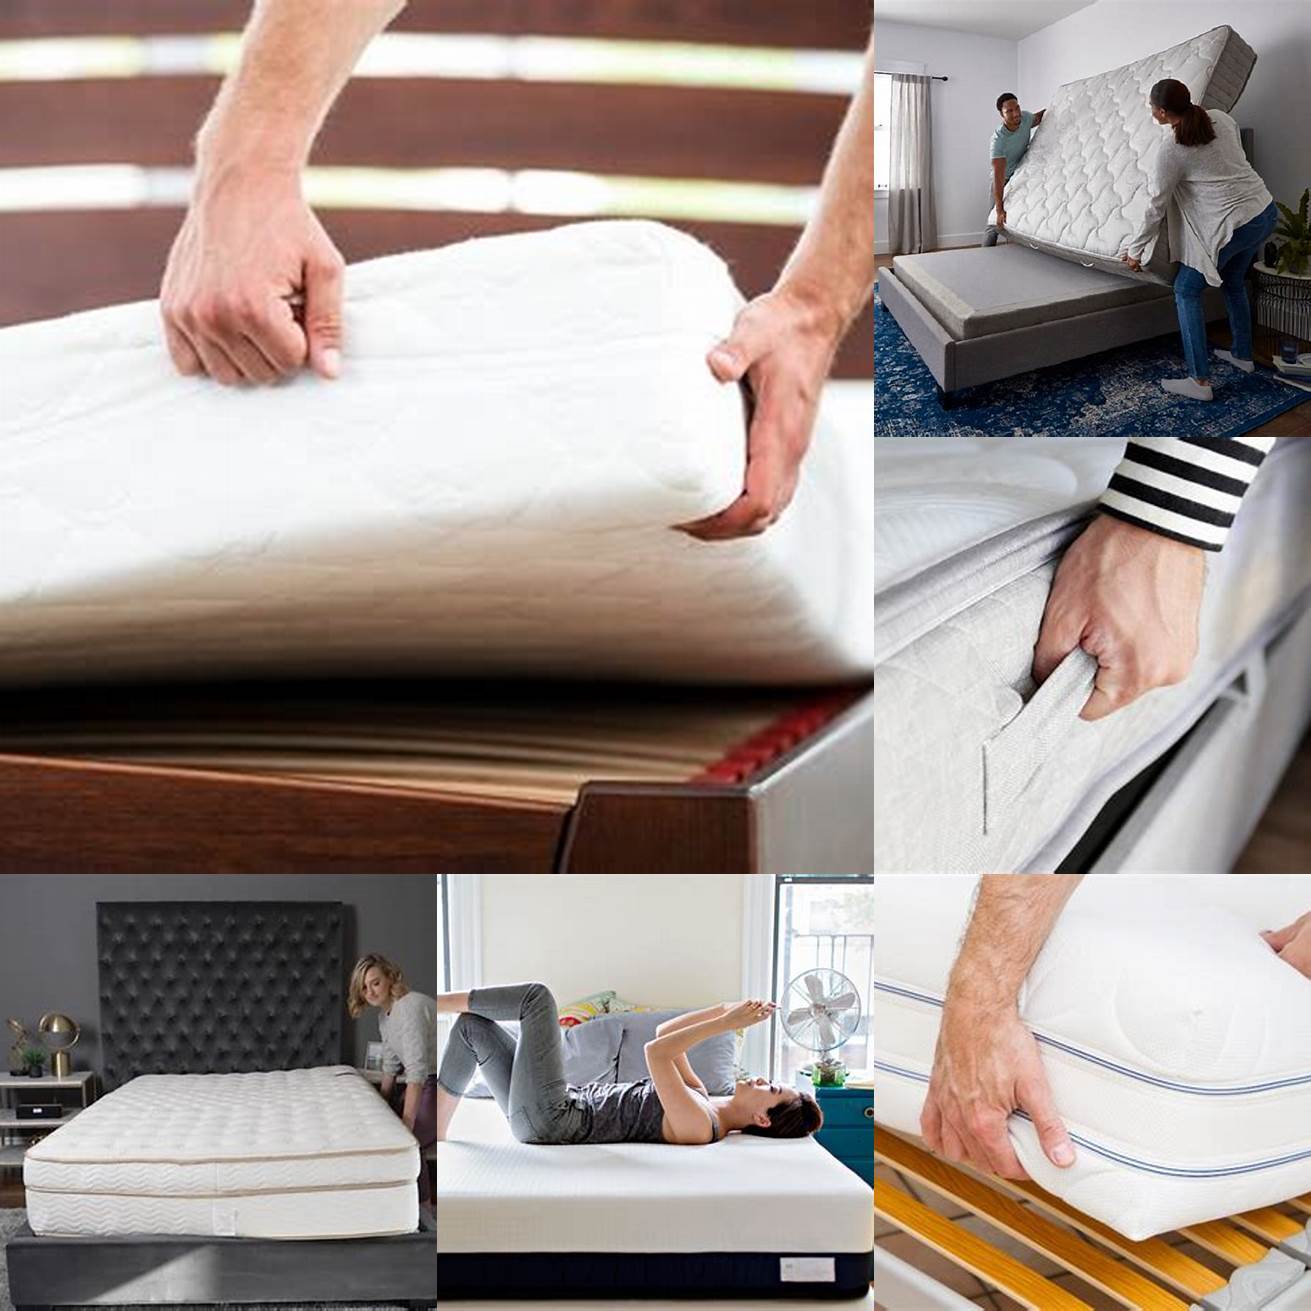 3 Rotate your mattress every 3-6 months to prevent sagging and wear